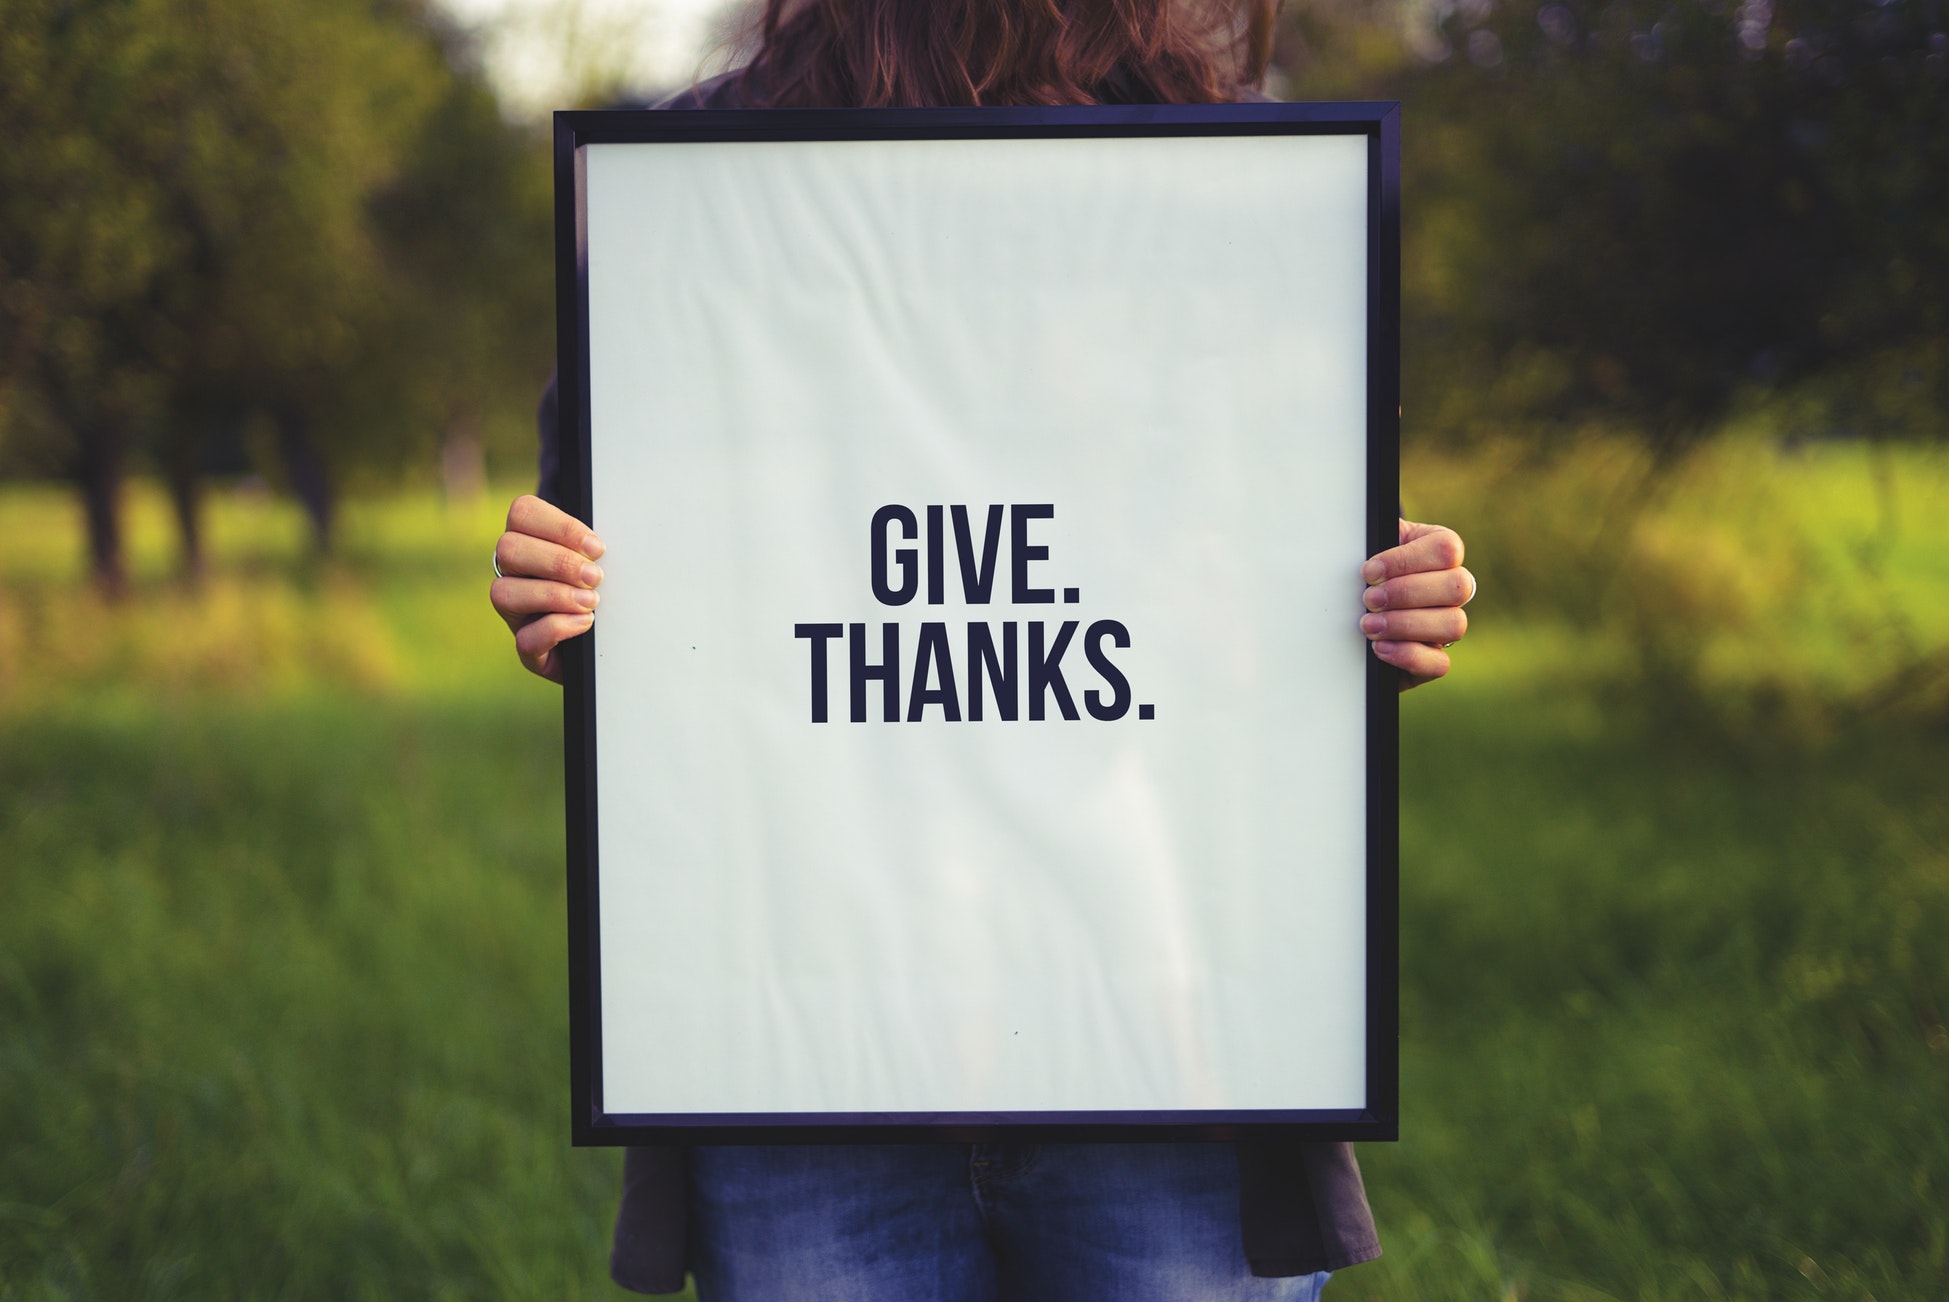 Gratitude not only helps you focus your attention on all the amazing people, things and experiences in your life, but it also has a scientifically-measurable effect on your psychology and physiology.